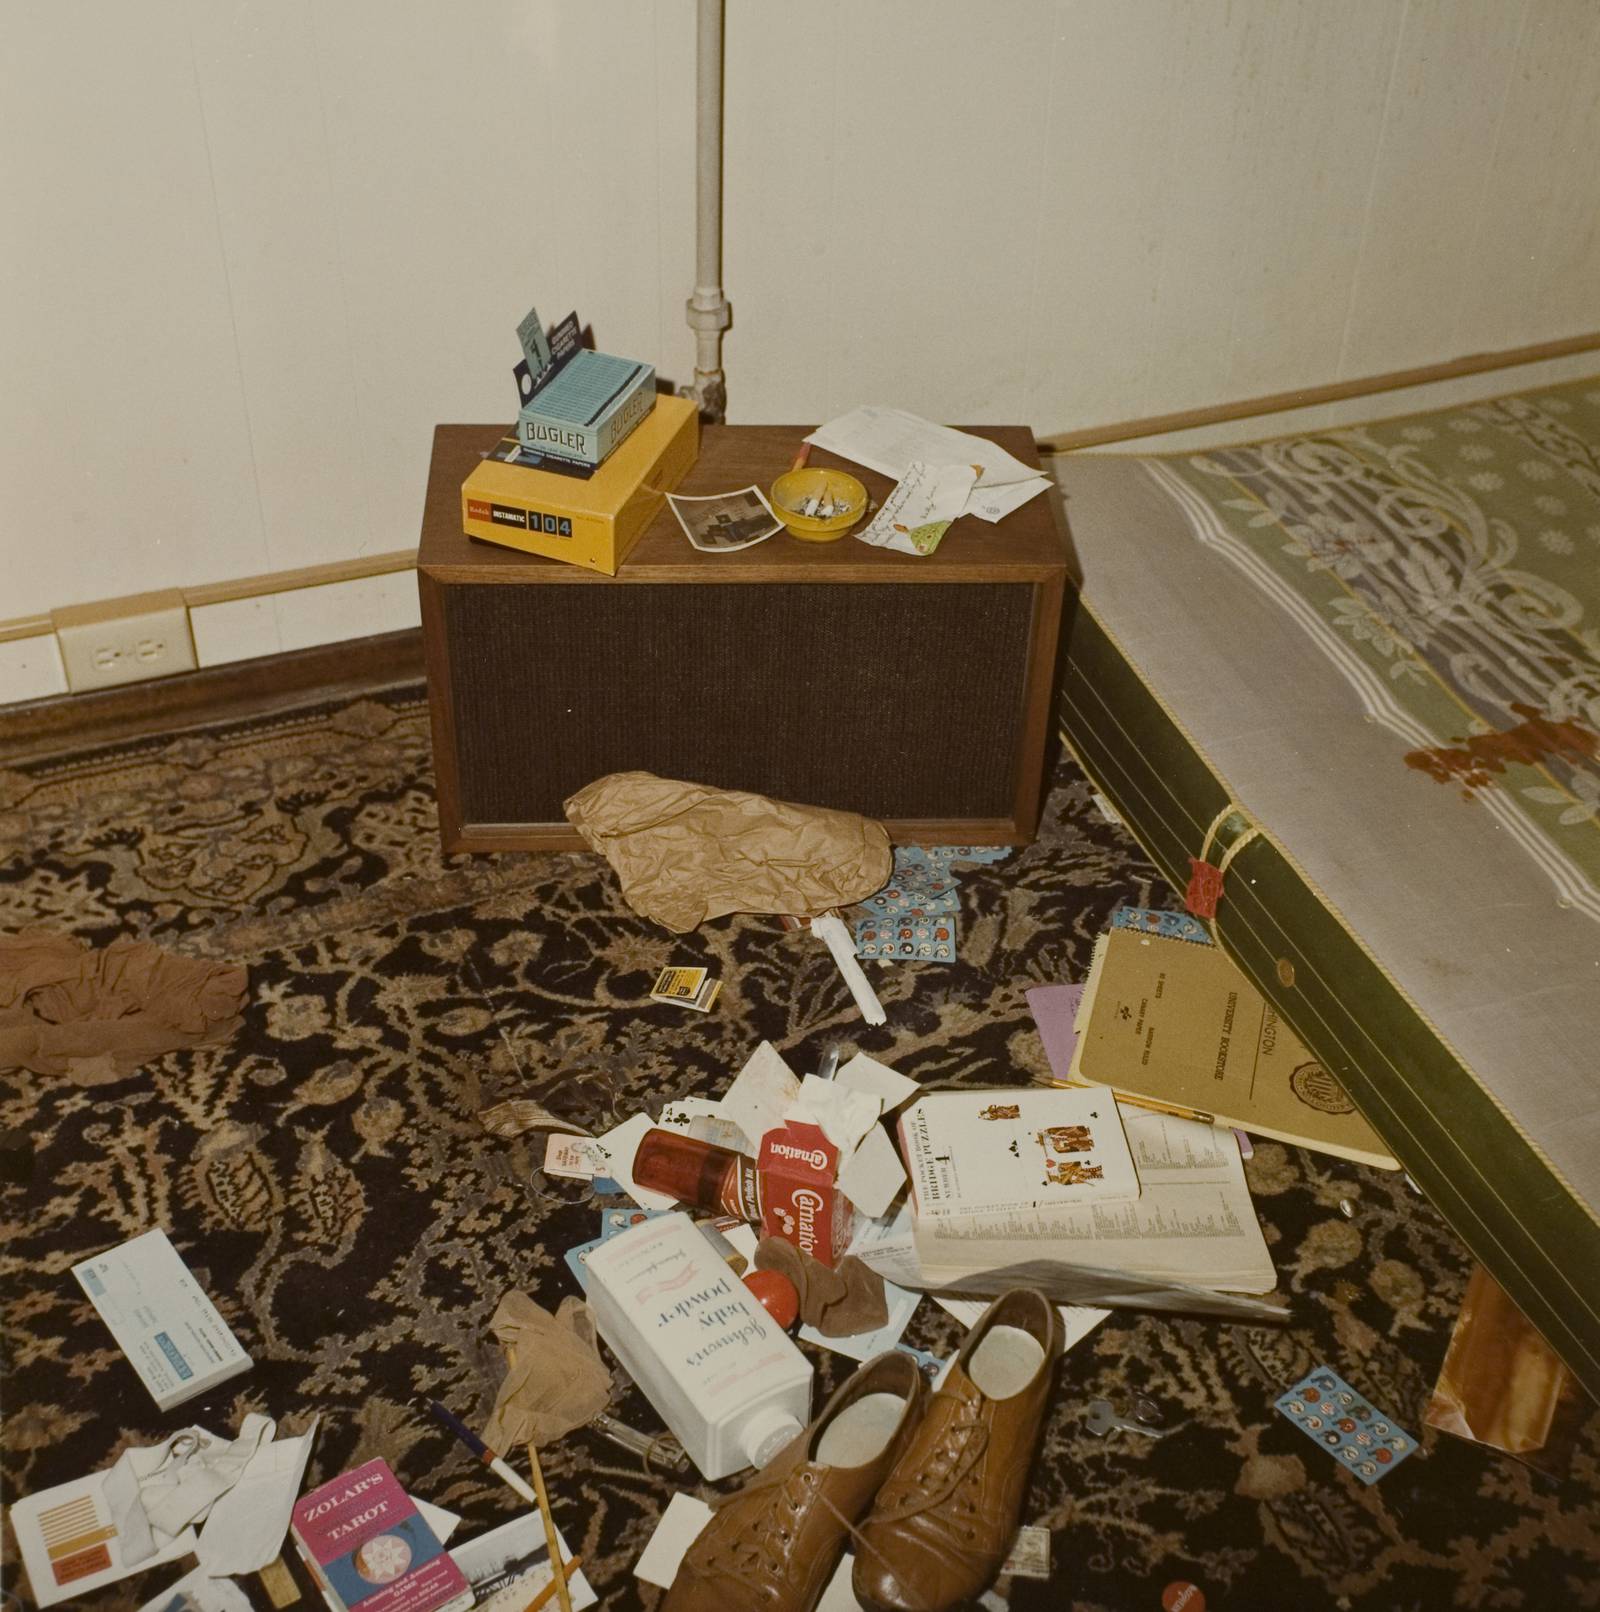 Photos Ted Bundy Evidence Photos Graphic Content Warning Kiro 7 News Seattle 6180